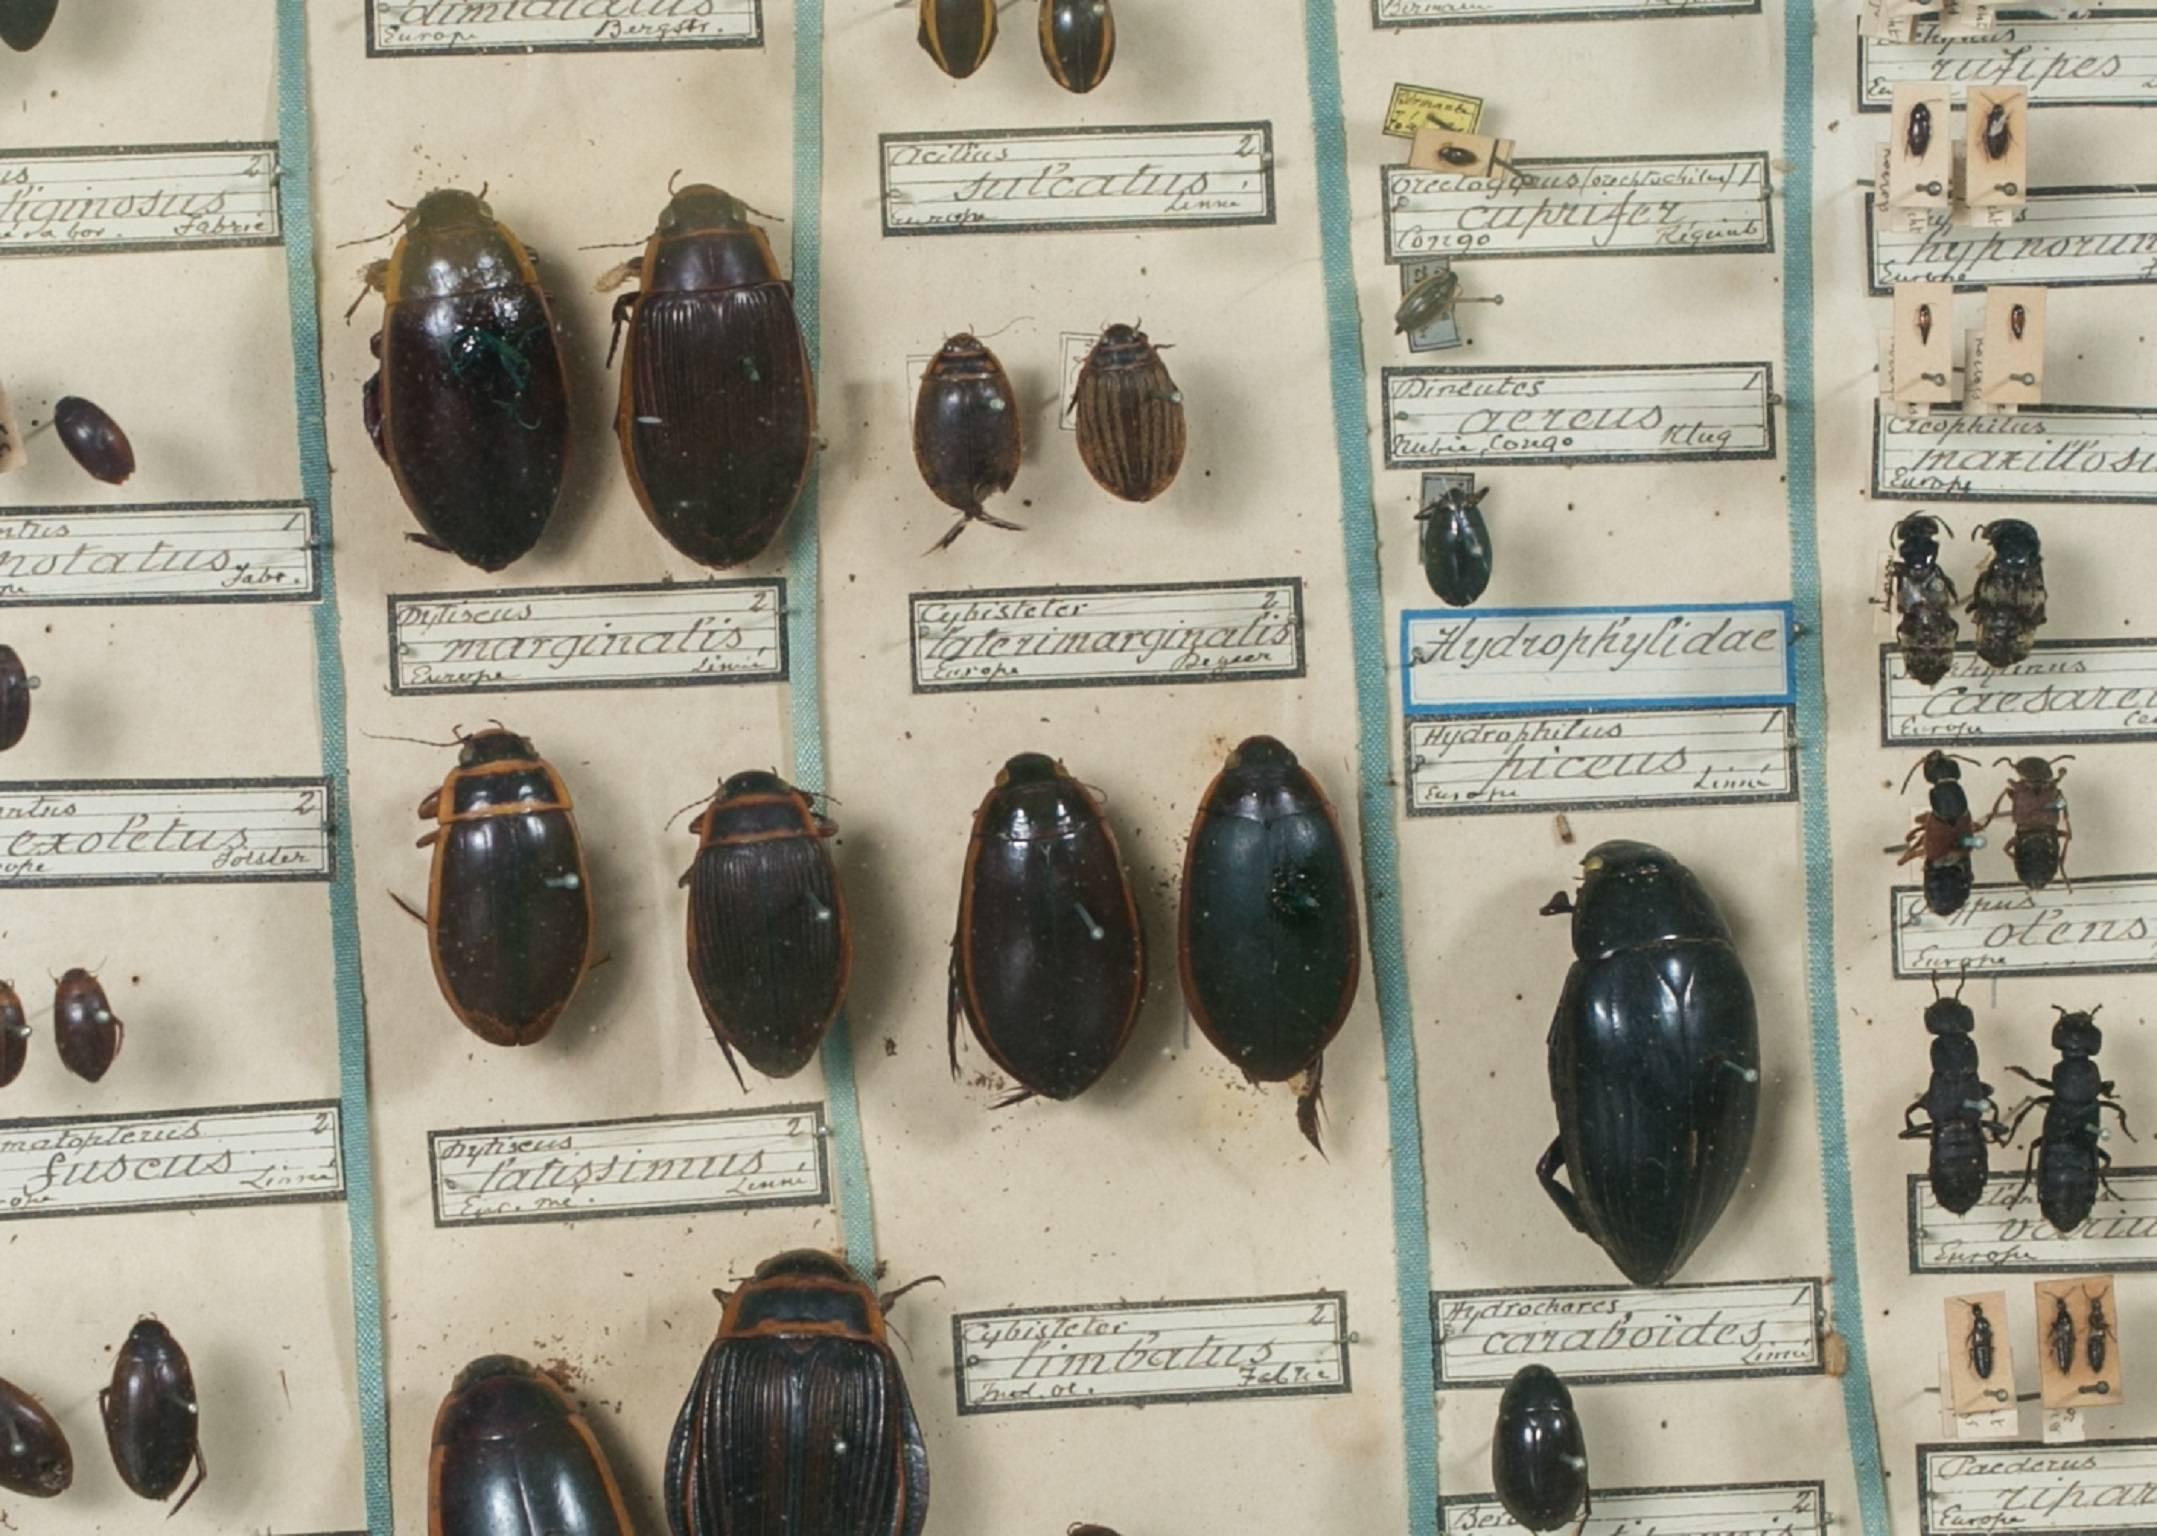 Vintage European collection of bug specimens, mounted and labelled in a wooden shadow box with glass lid. Most of the insects appear to be of the beetle family from France, circa 1950s.